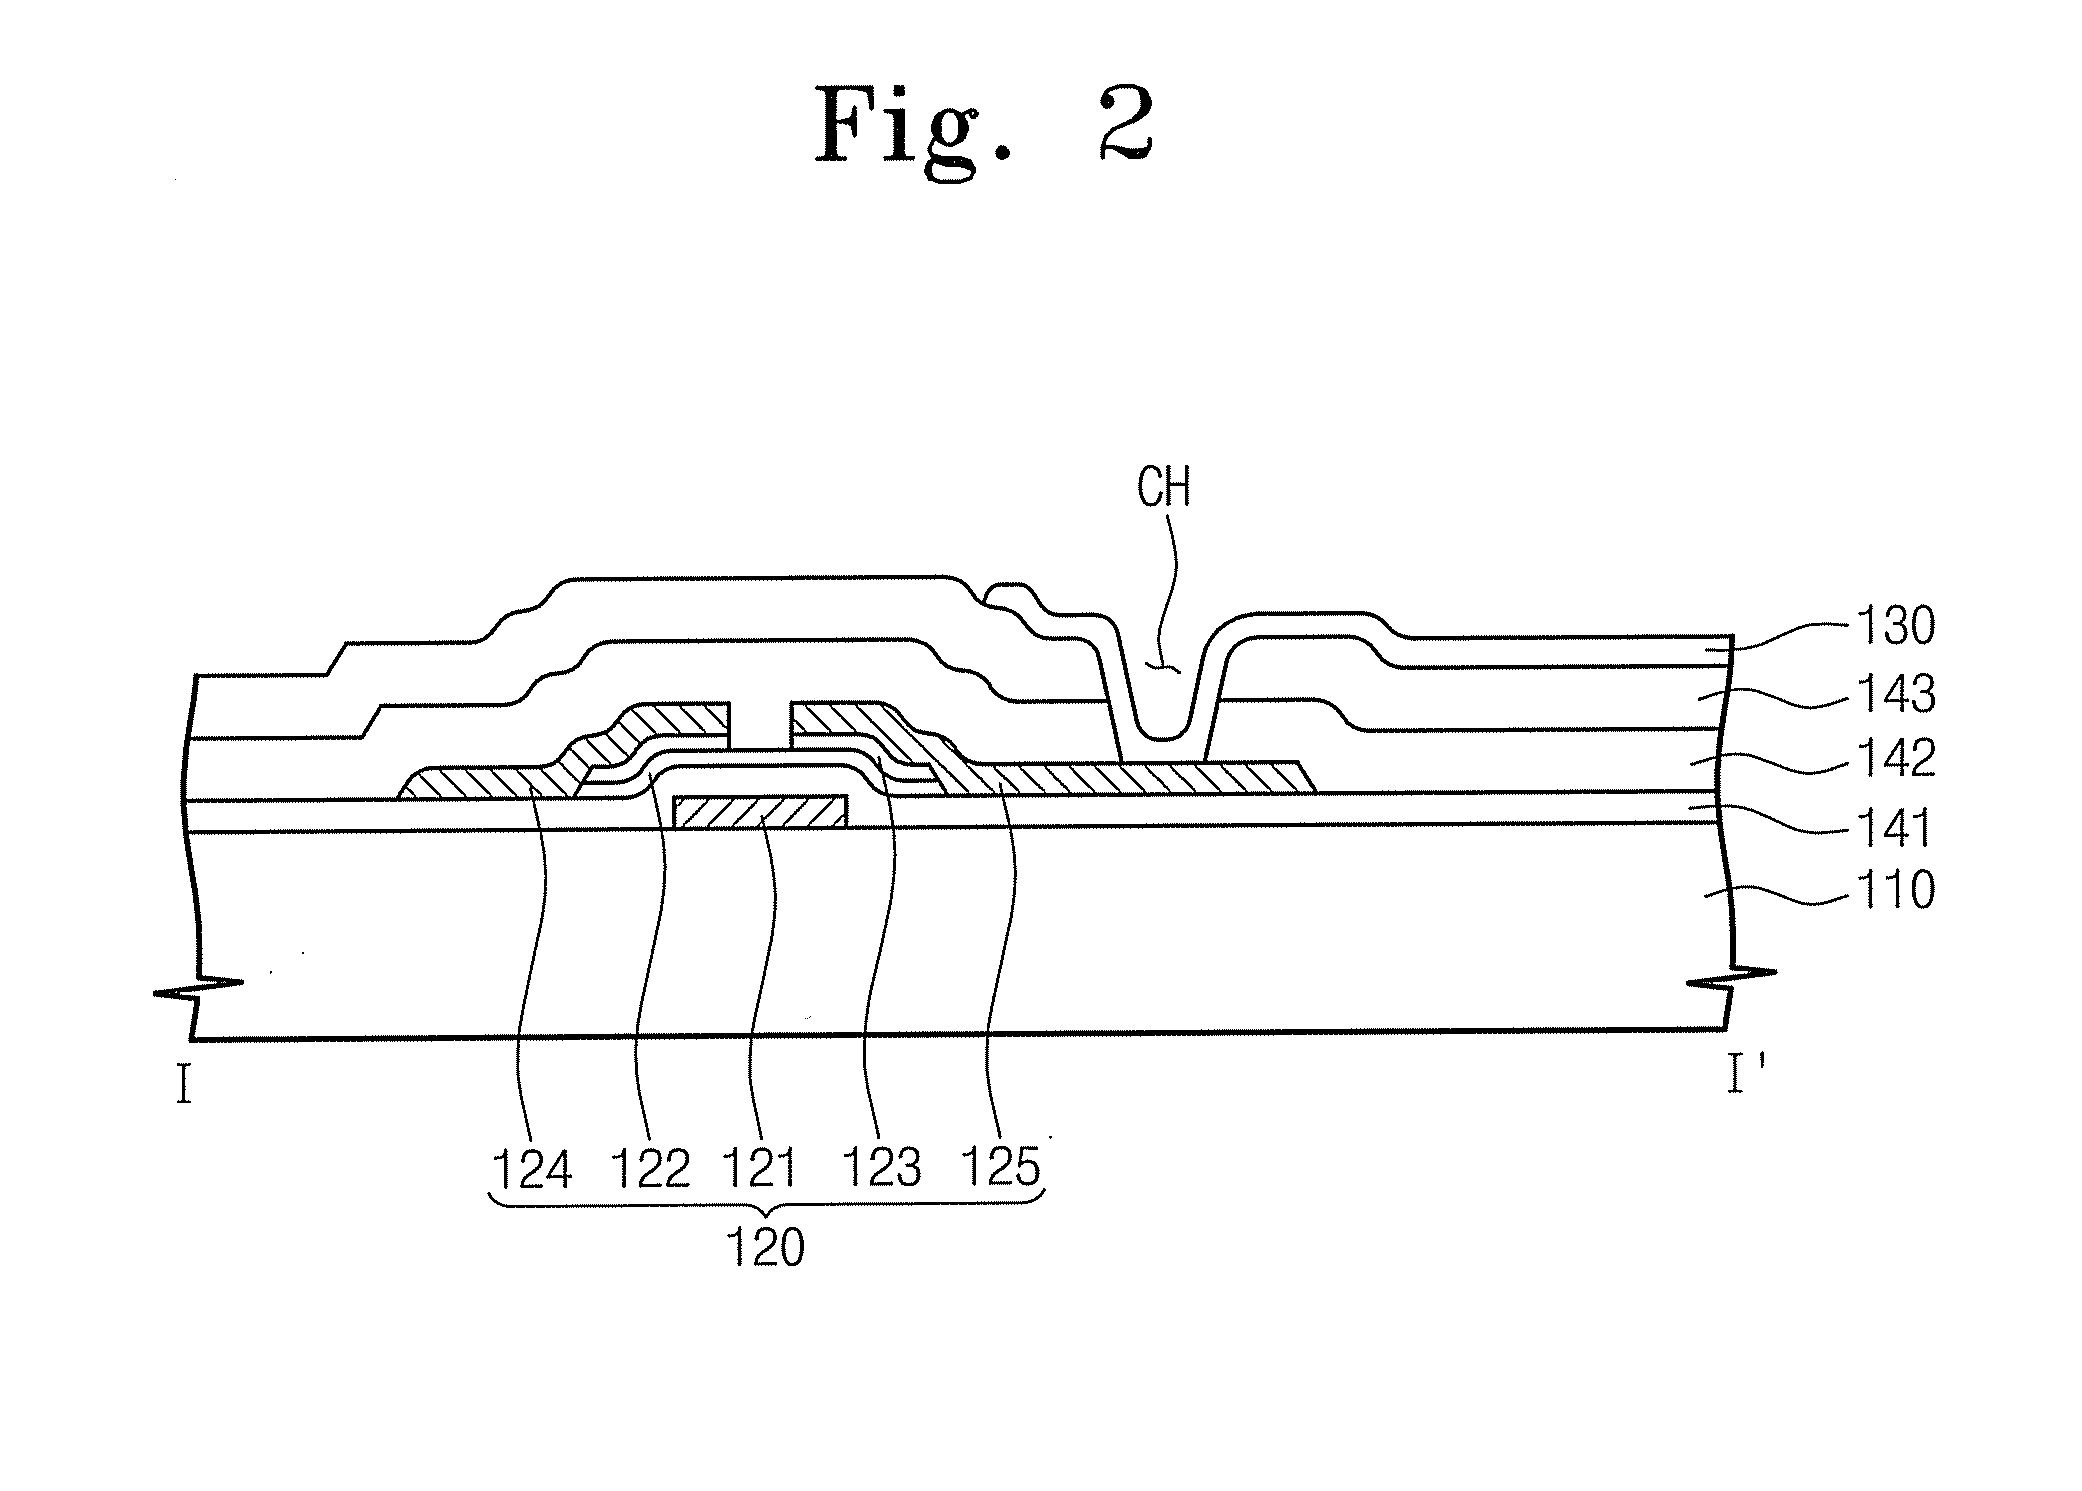 Array substrate, display apparatus having the same